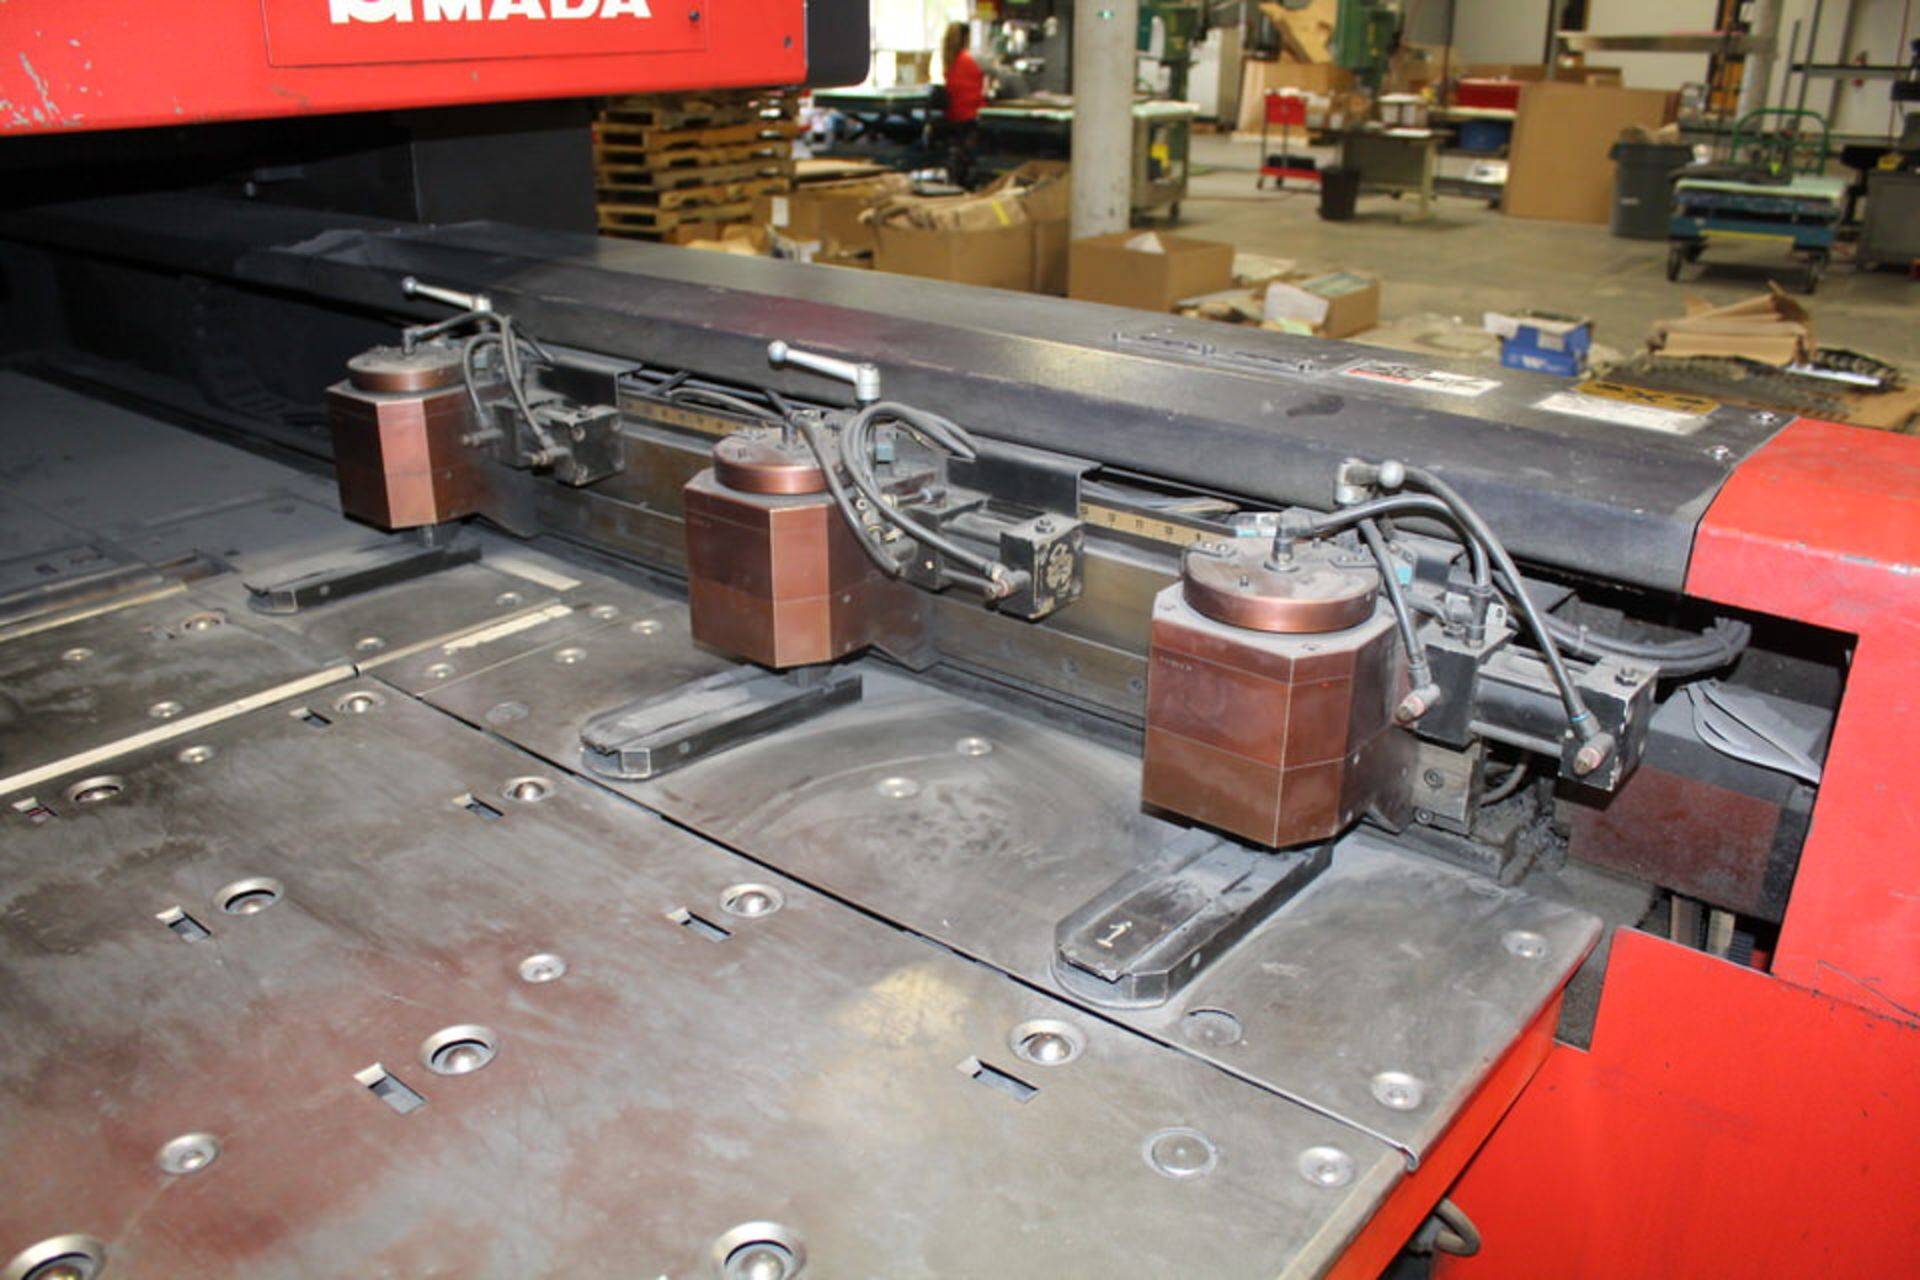 1994 AMADA LC1212 LASER CUTTER 6' X 8' TABLE, W/ FANUC SERIES 16-L CTRL, W/ CHIP CONVEYOR - Image 5 of 6